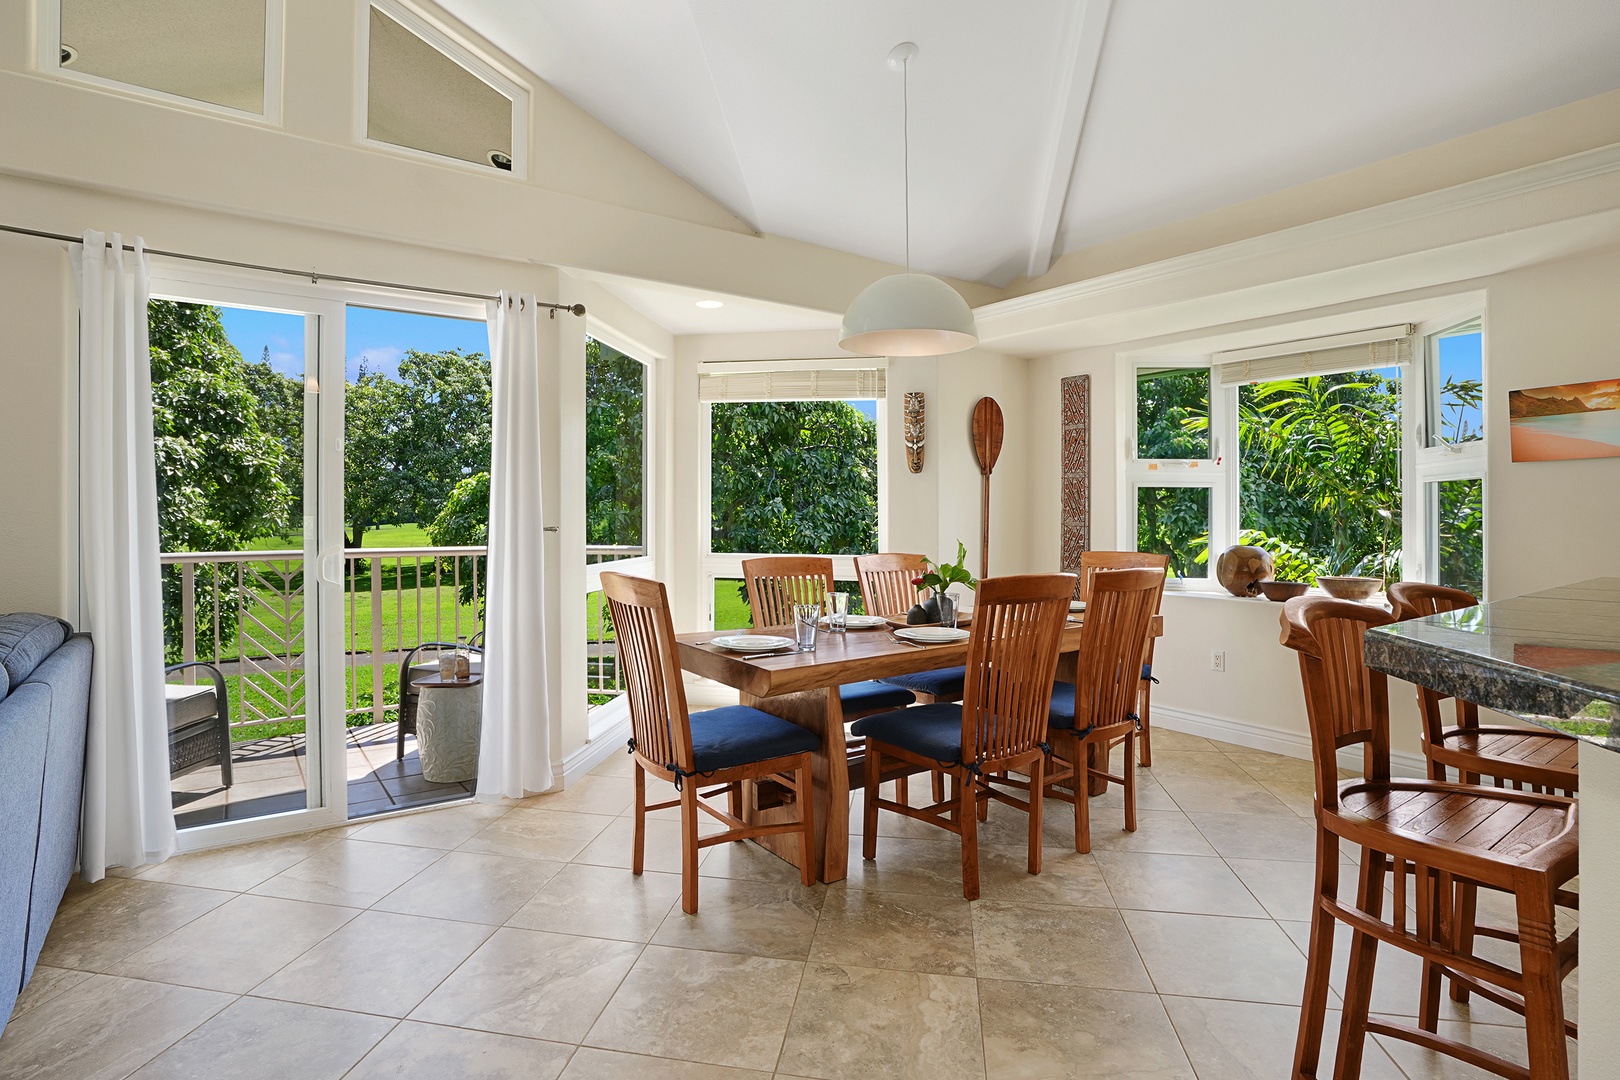 Princeville Vacation Rentals, Ku'u Lei Villa - Dining room with golf course view